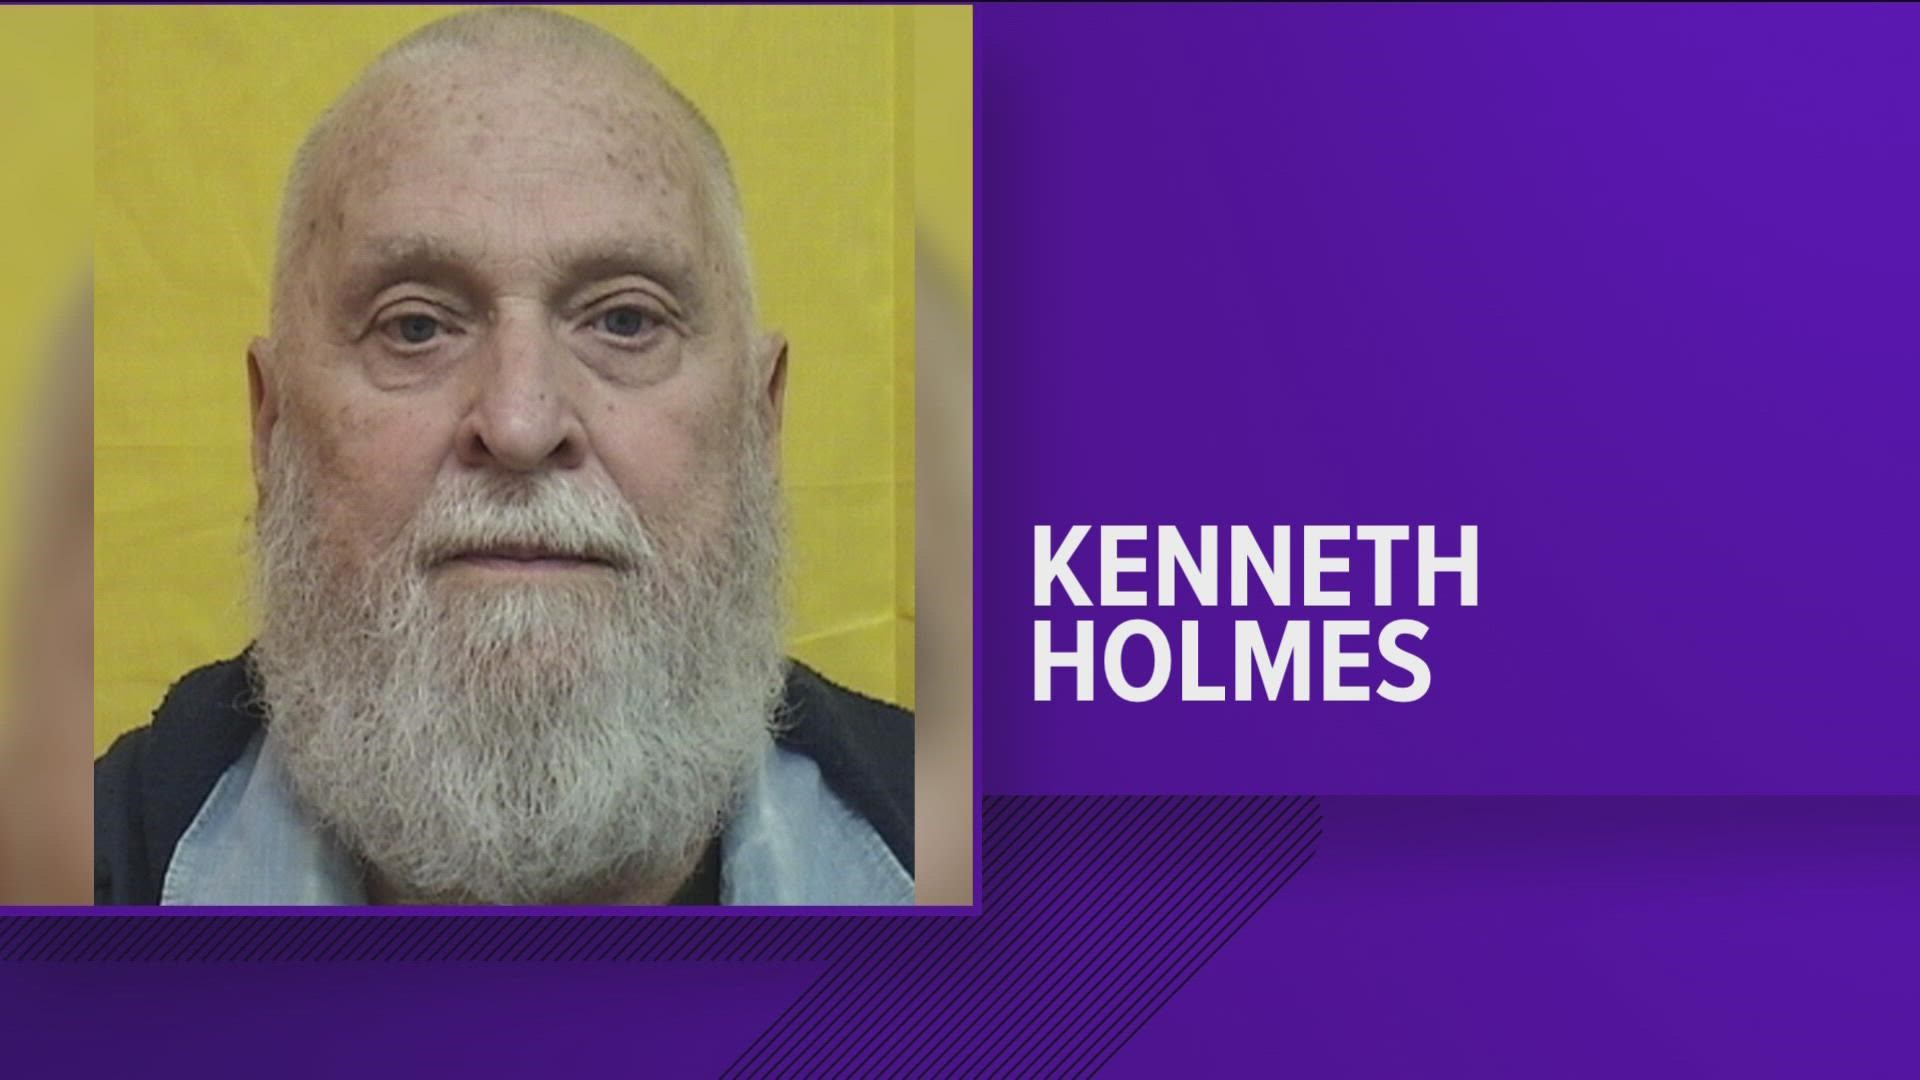 Kenneth Holmes, 68, pled guilty and was sentenced to 15 years to life on Thursday for a murder charge in the September 1983 death of 30-year-old Patricia Ann Heer.